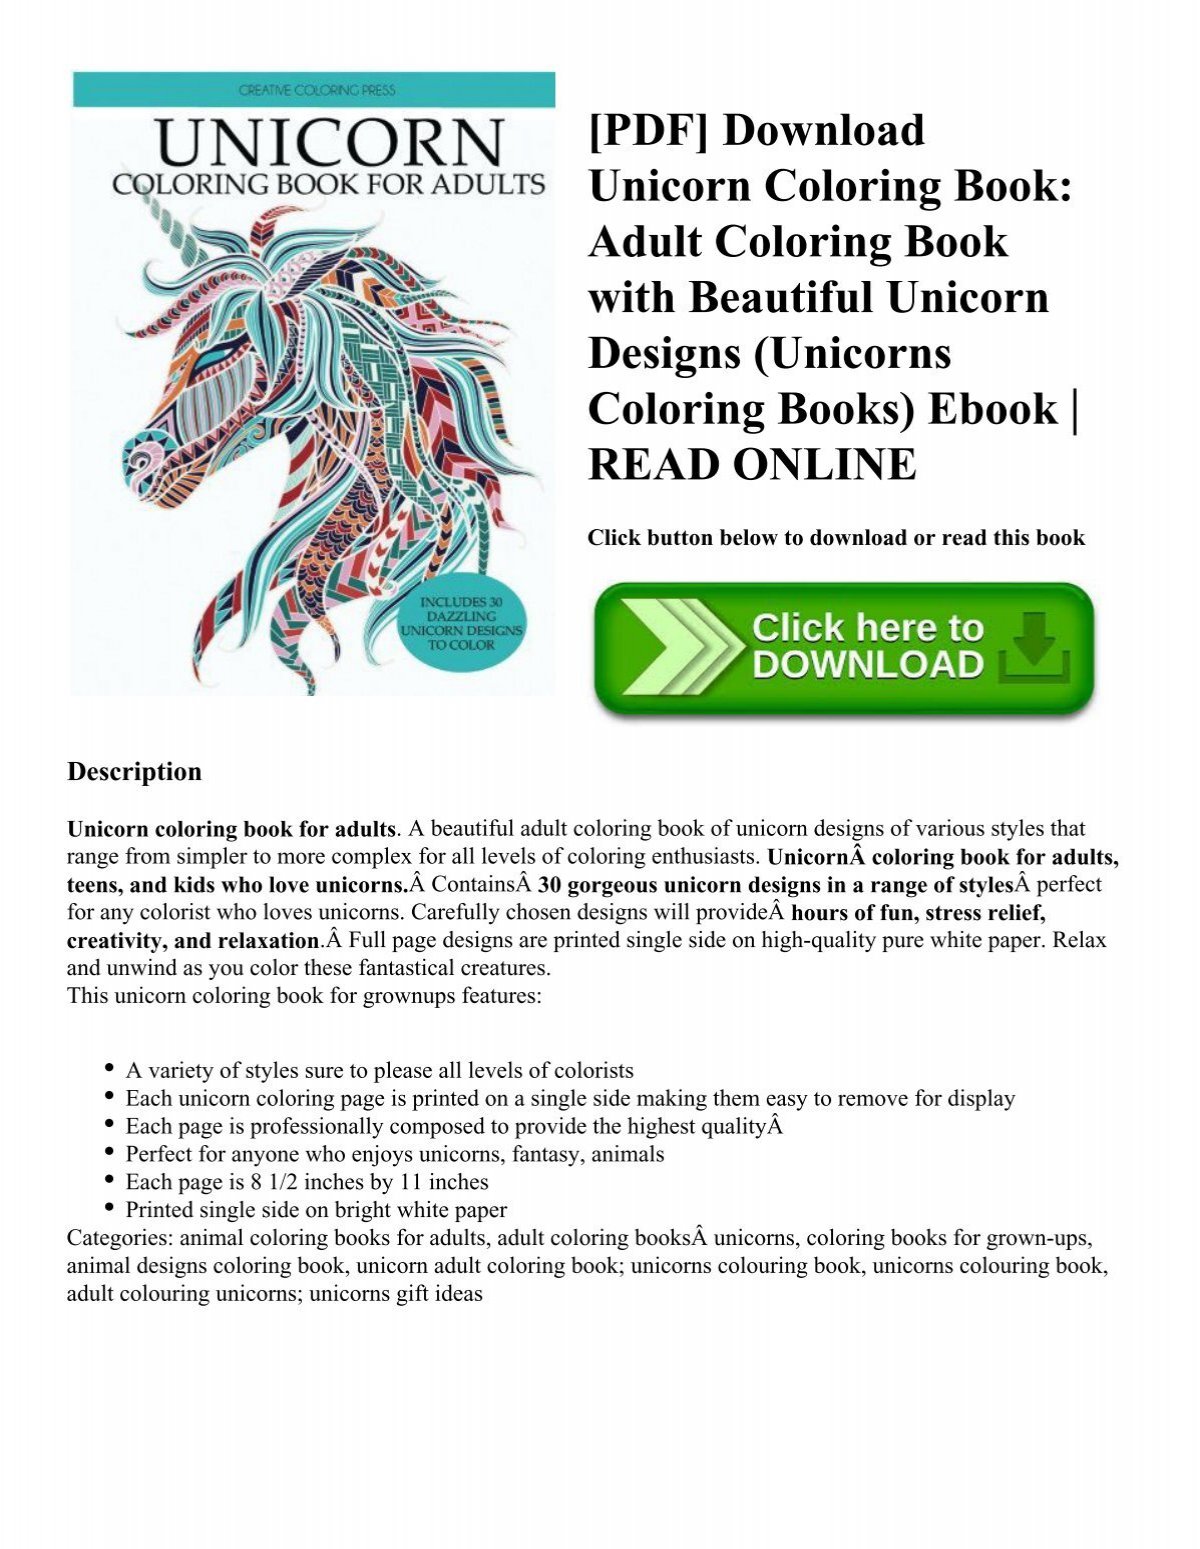 Download Pdf Download Unicorn Coloring Book Adult Coloring Book With Beautiful Unicorn Designs Unicorns Coloring Books Ebook Read Online